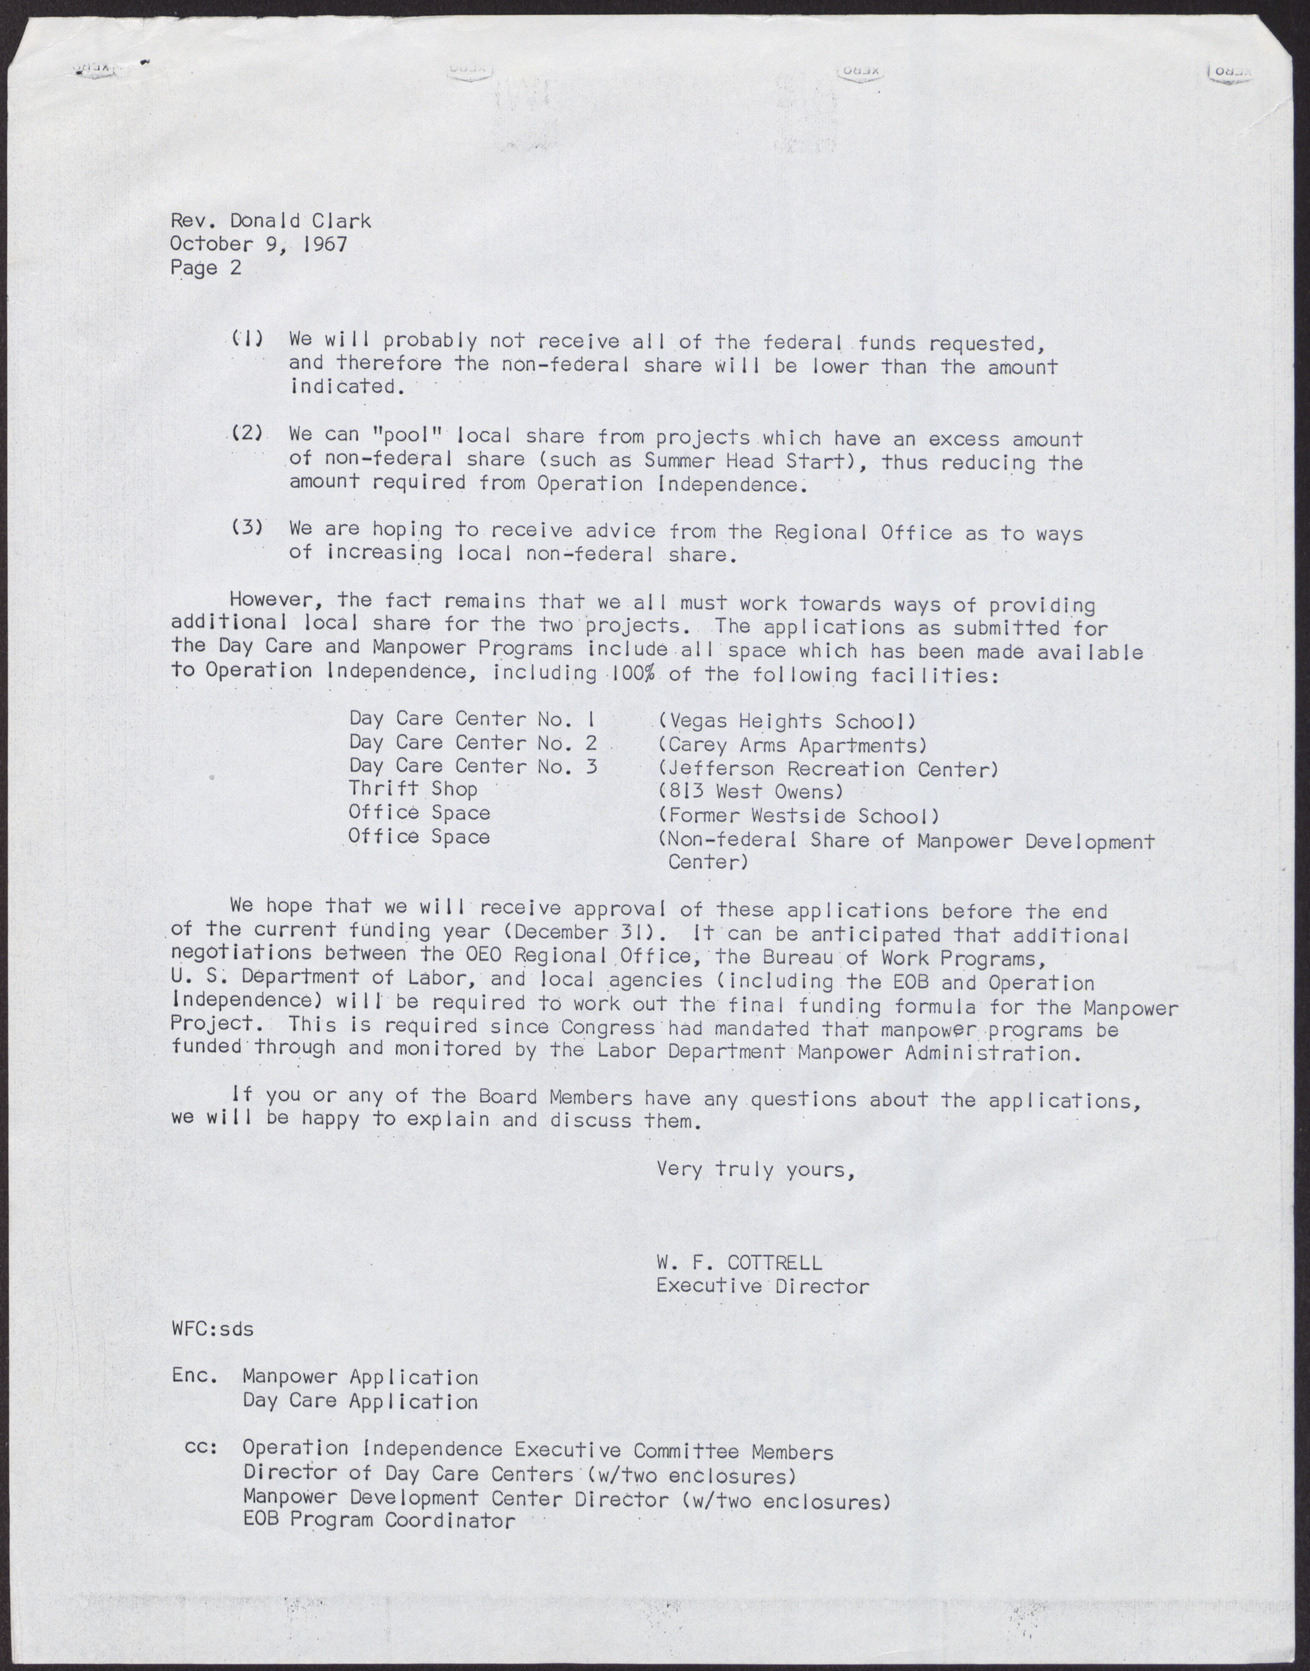 Letter to Rev. Donald Clark from W. F. Cottrell (2 pages), October 9, 1967, page 2